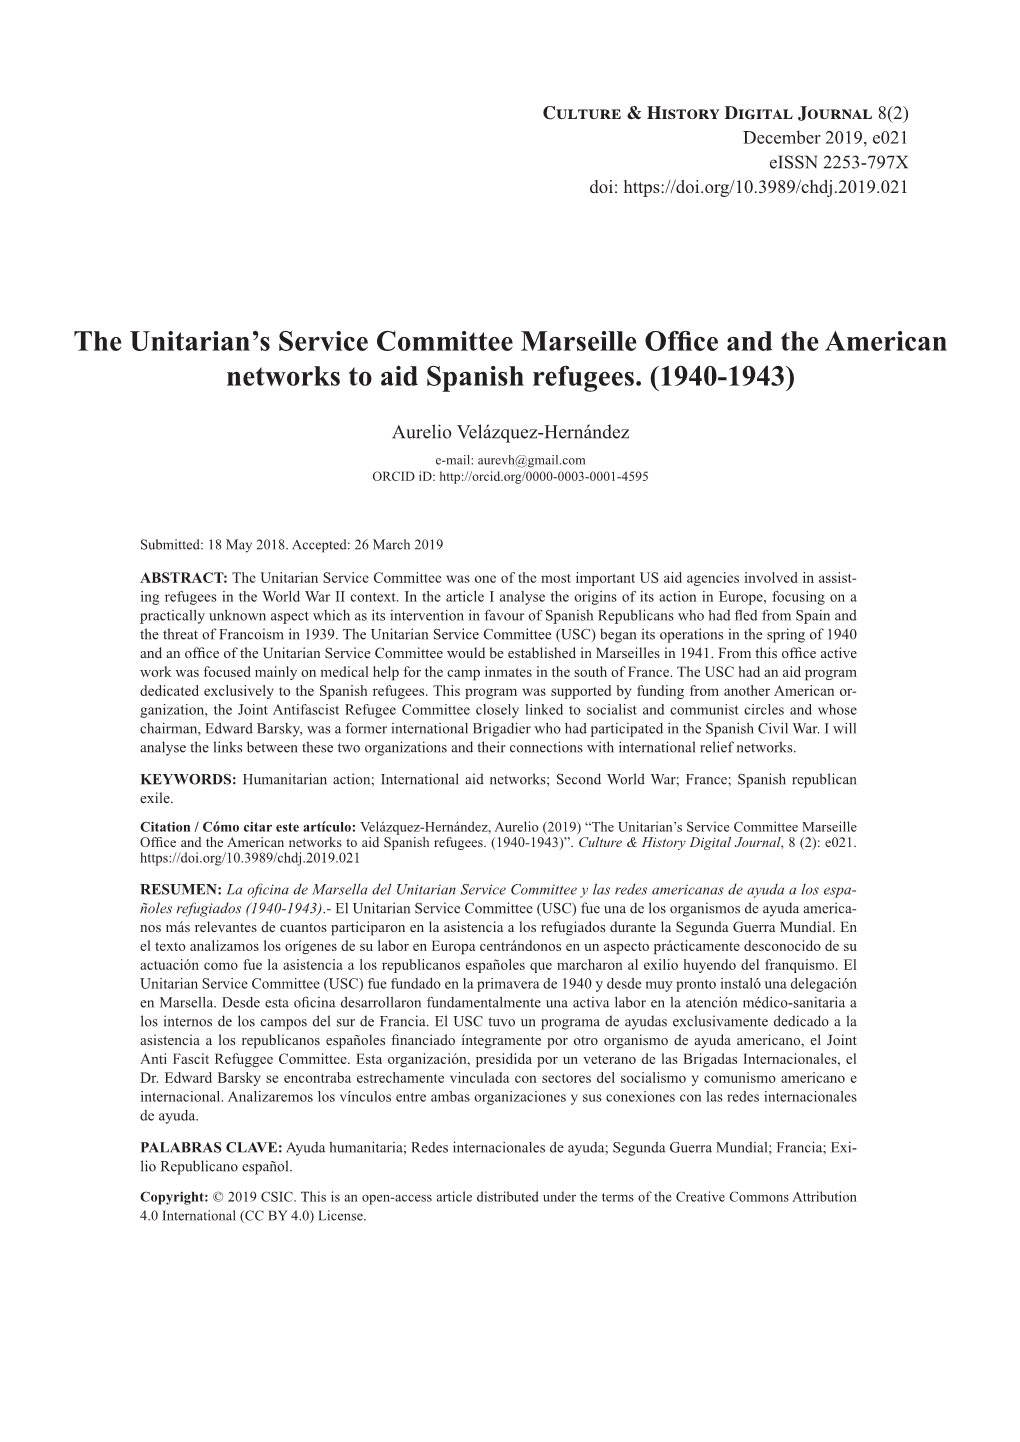 The Unitarian's Service Committee Marseille Office and the American Networks to Aid Spanish Refugees